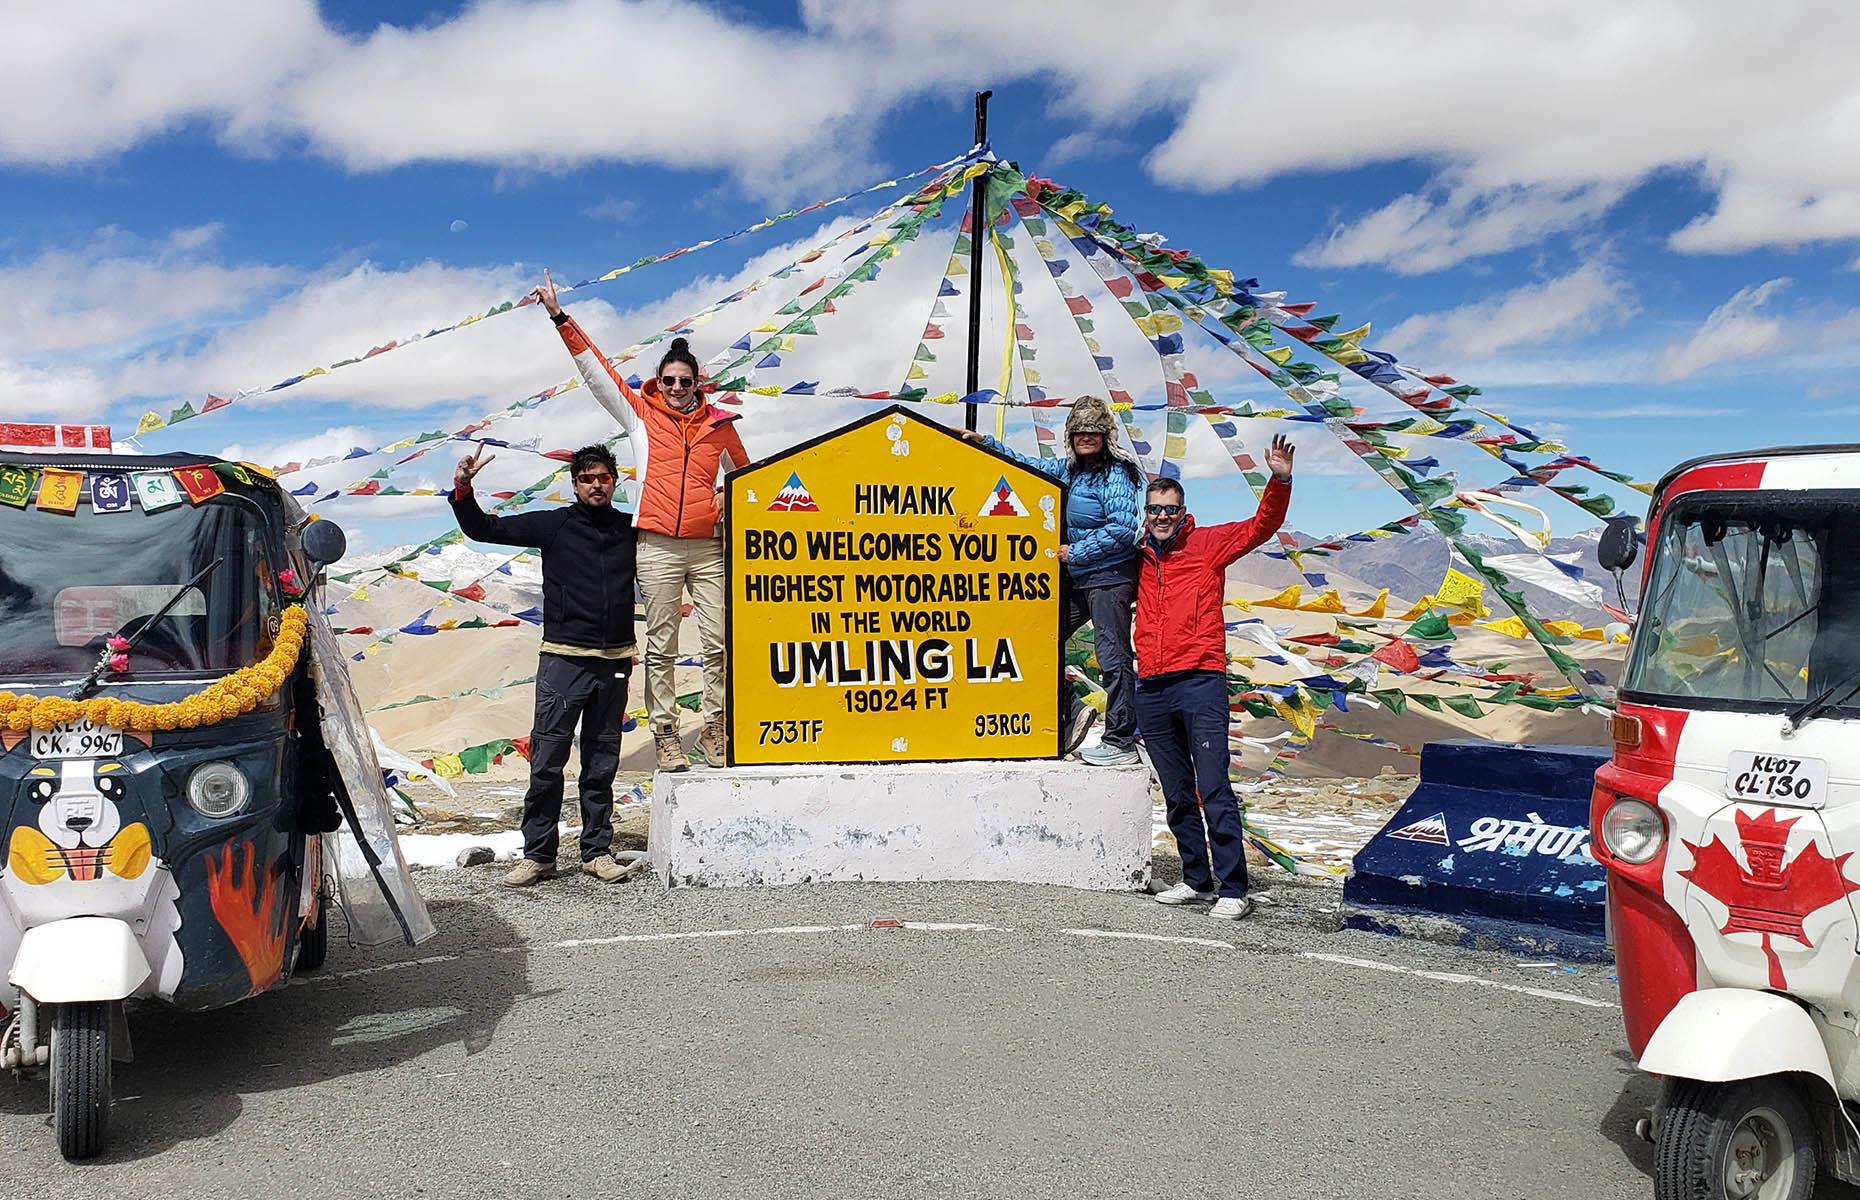 <p>Connecting remote mountain villages in the Indian province of Ladakh, the Umling La Pass was certified by Guinness World Records as the world's highest drivable road in 2021. Topping out at 19,300 feet above sea level, the Himalayan road is higher than both Everest base camps, and low oxygen levels, heavy snowfall and blisteringly low temperatures make the pass brutally inhospitable in winter.</p>